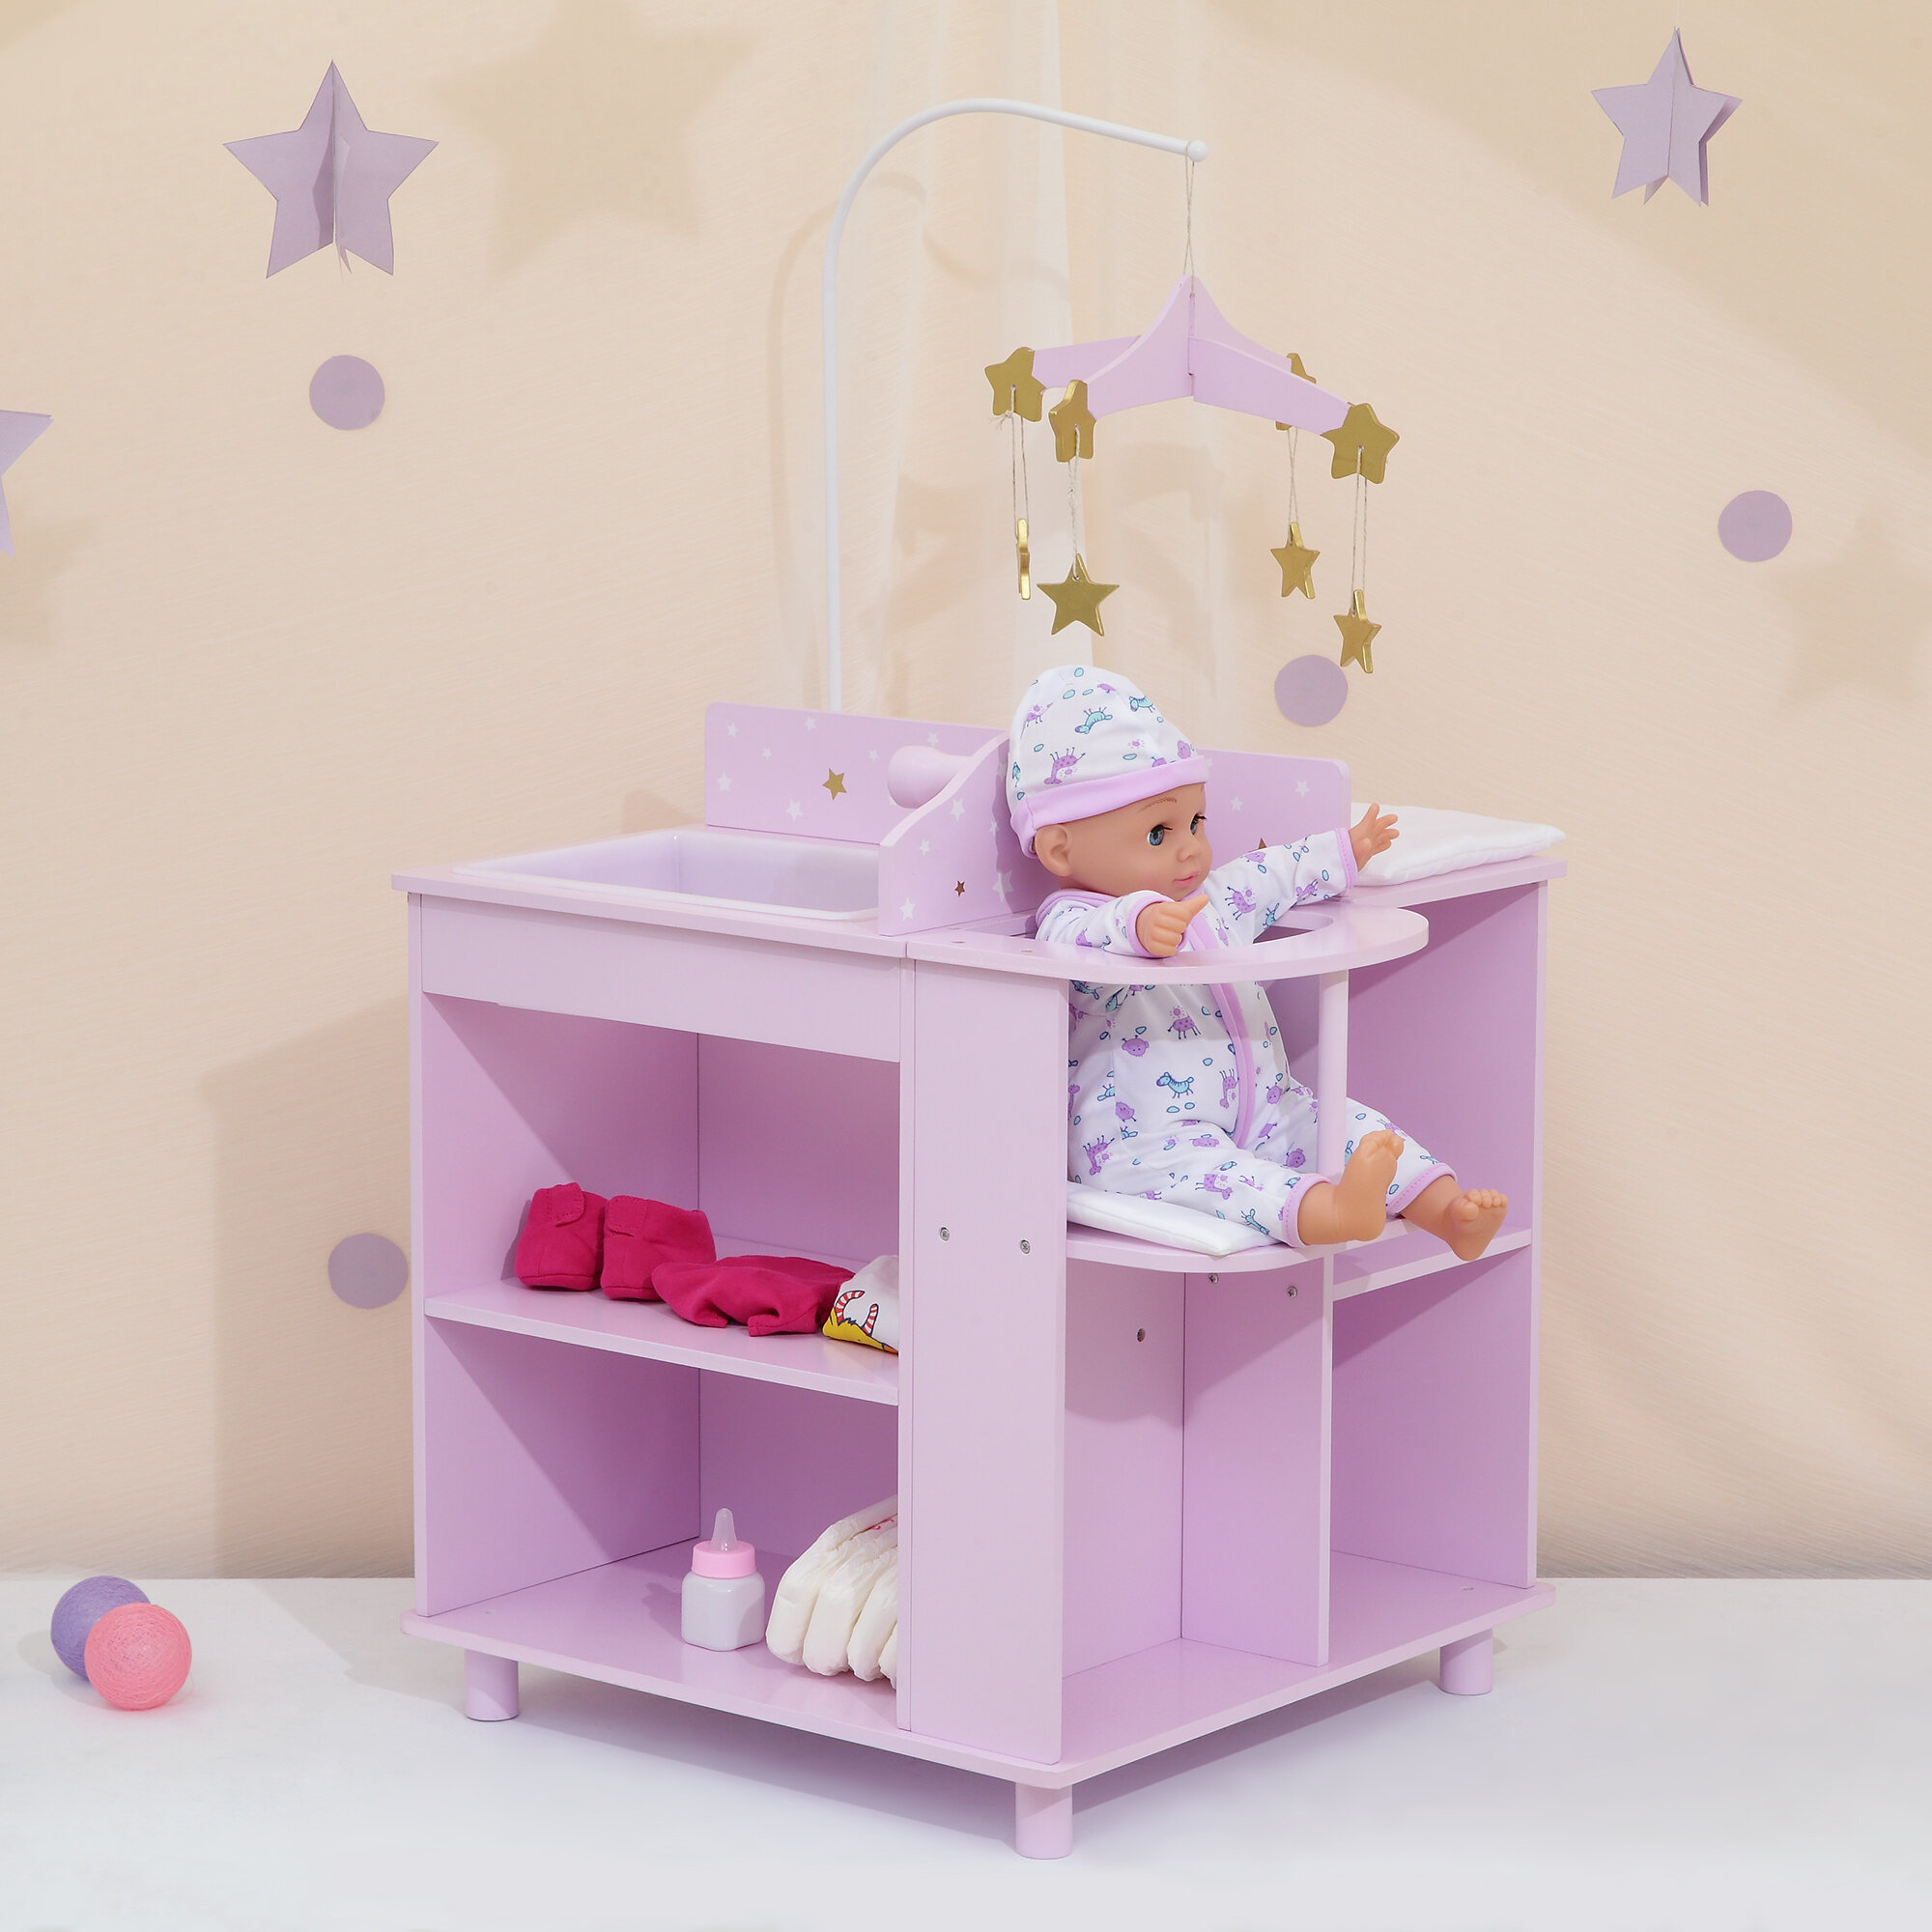 Olivias Little World Twinkle Stars Princess Baby Doll Changing Station With Storage Reviews Wayfair